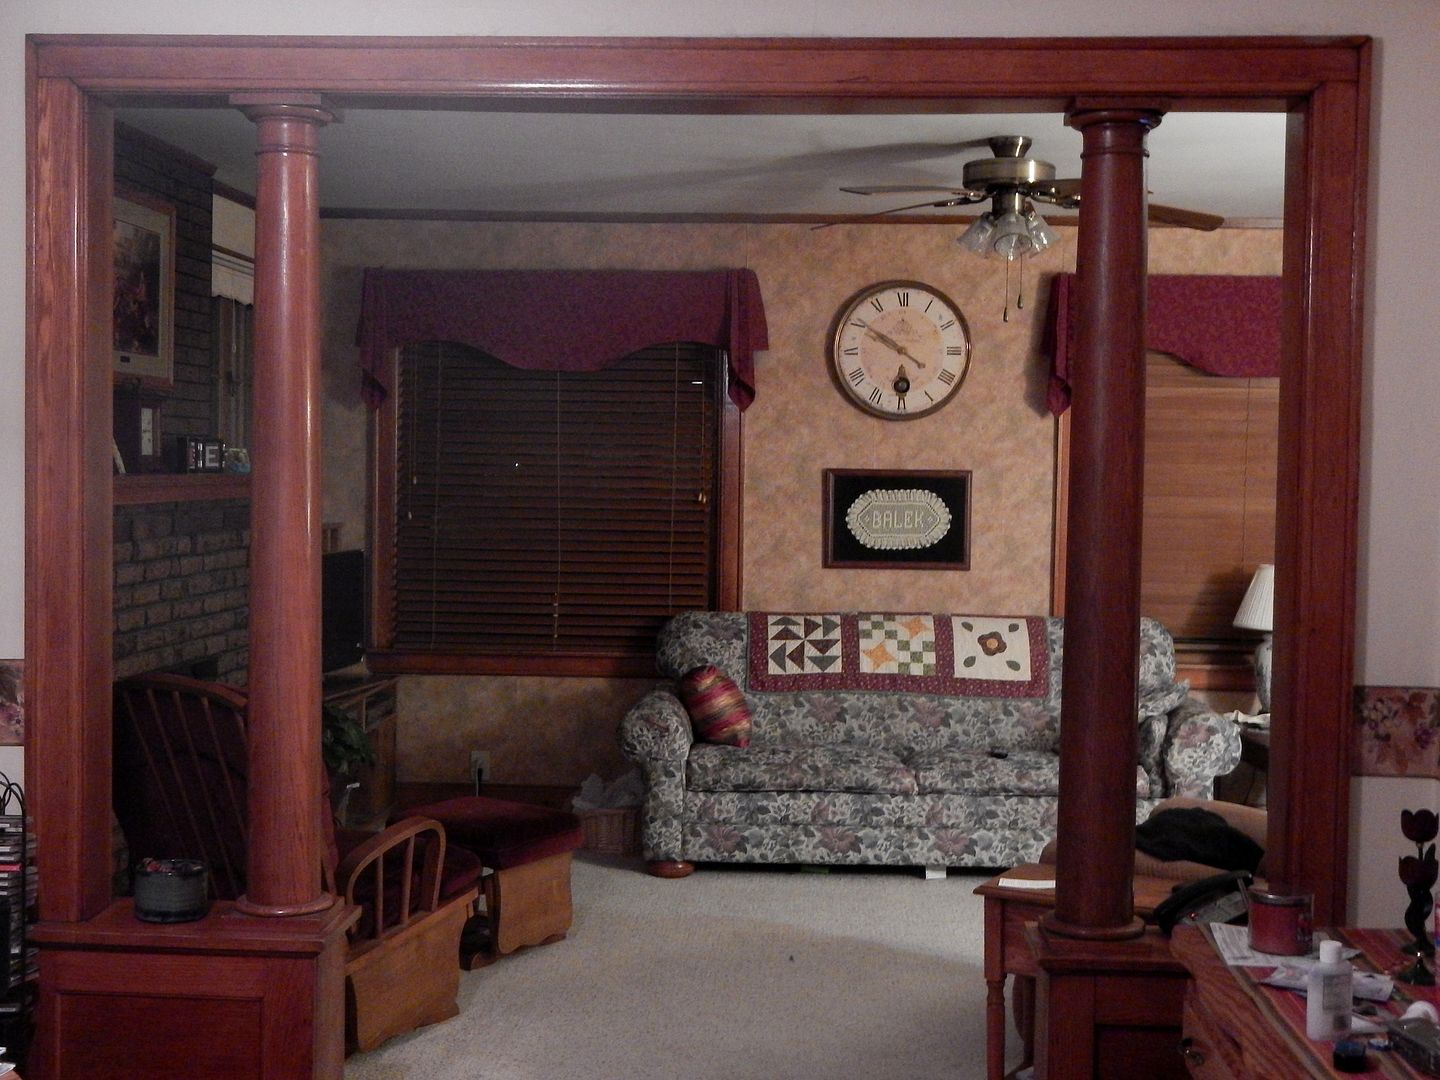 Donita also shared some pictures of the homes interior. 